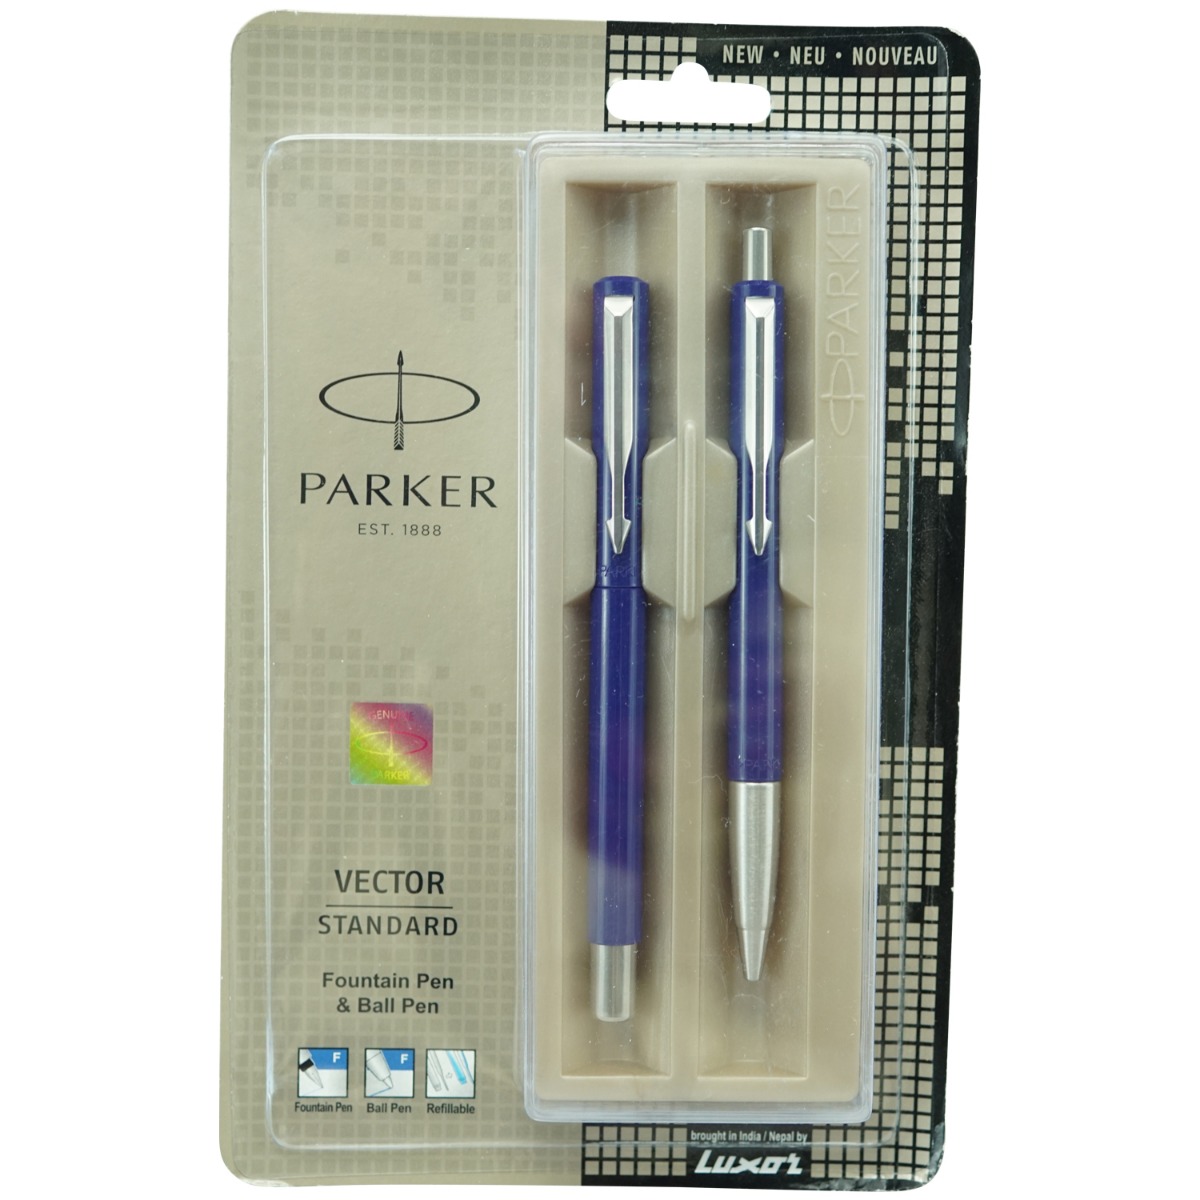 Parker Vector Standard Model:16116 Blue Color Body with Silver Clip With Fountain Pen and Ball Pen Set